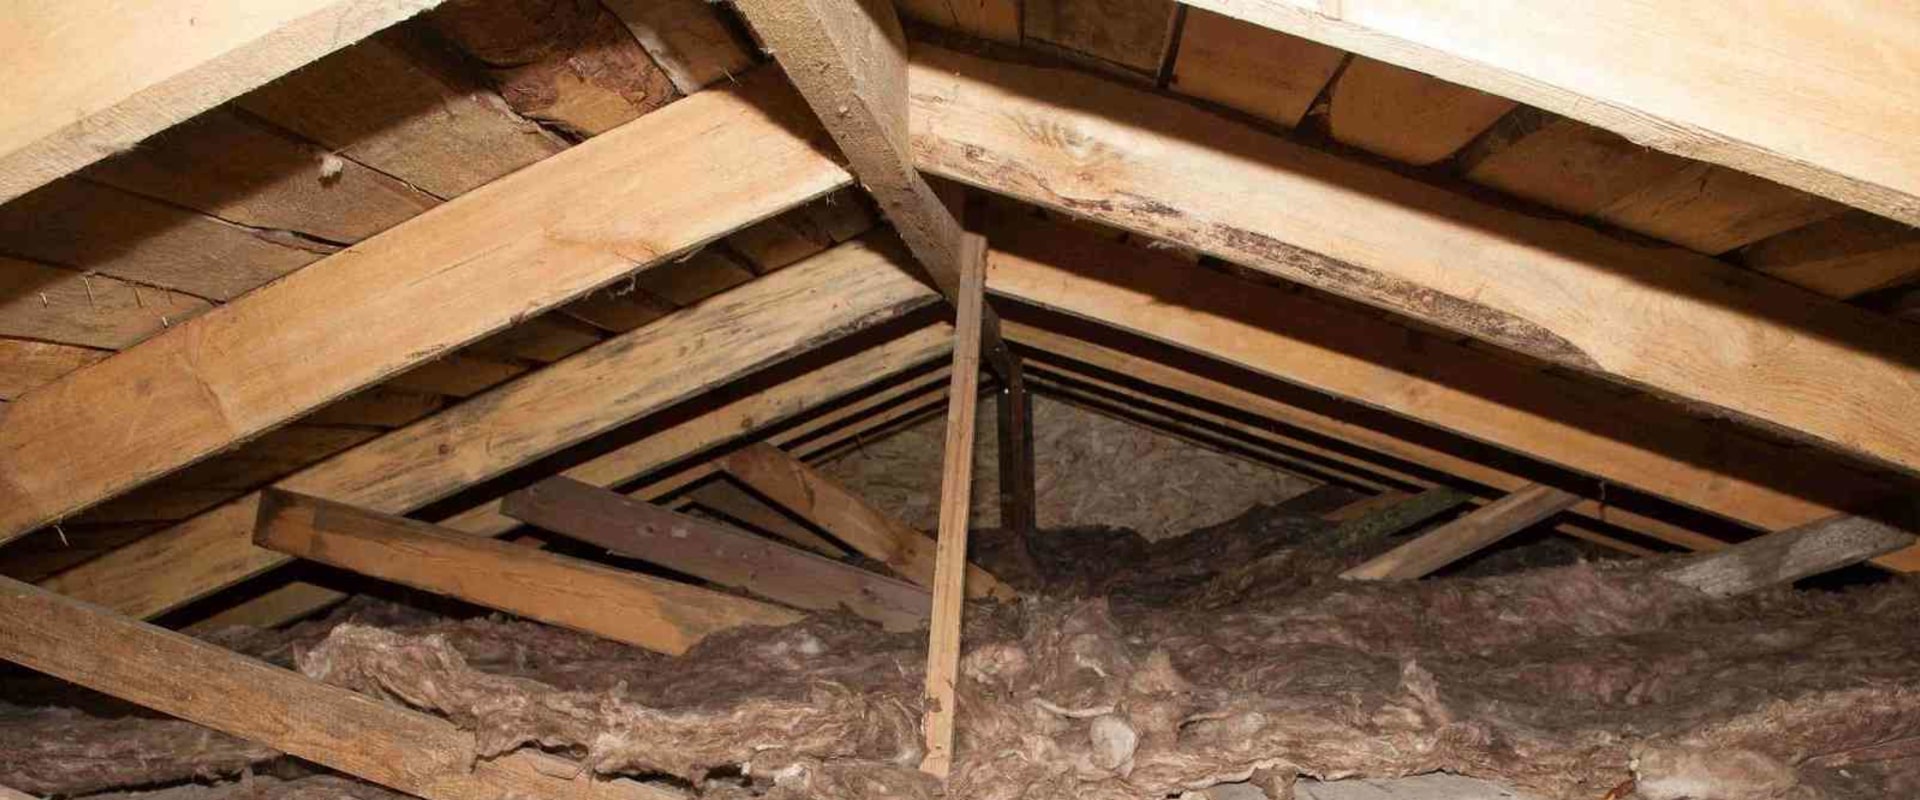 Can I Add an Extra Layer of Insulation to My Existing Attic Installation Without Damaging It?